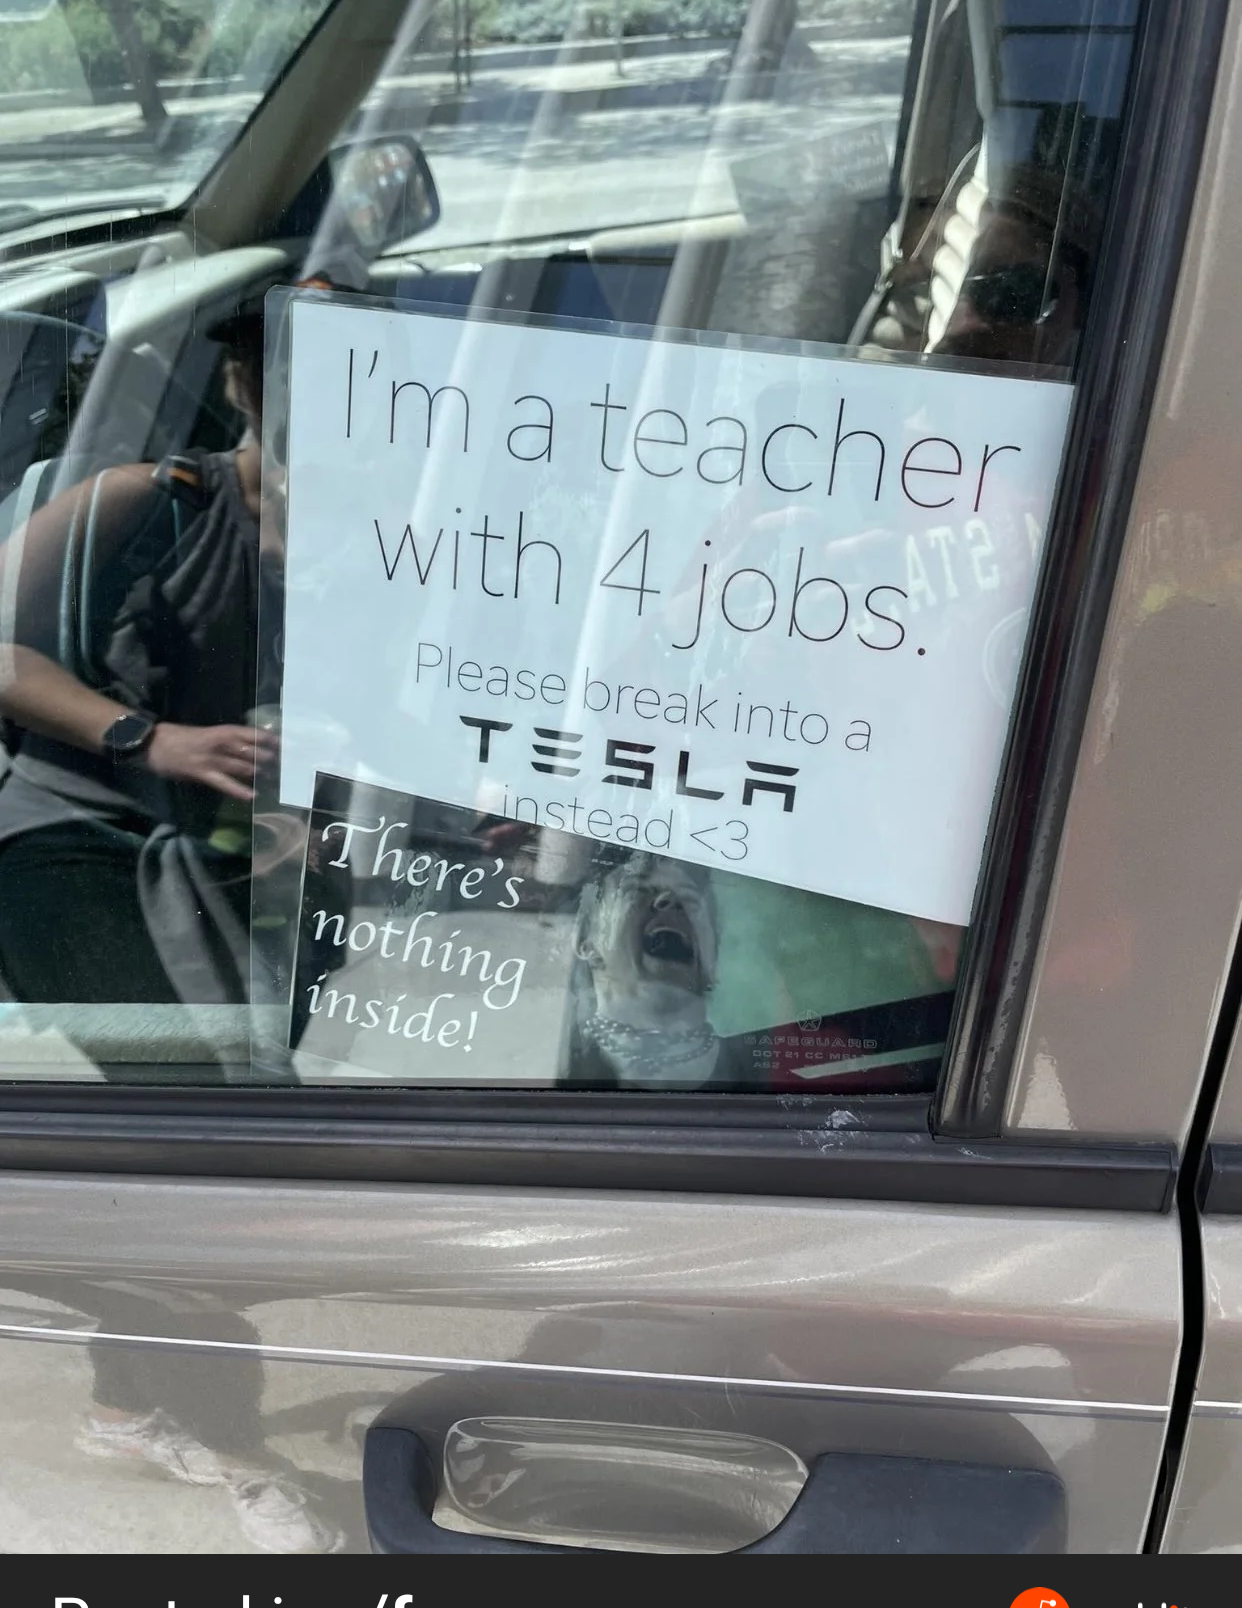 Sign in the car window: &quot;I&#x27;m a teacher with 4 jobs; please break into a Tesla instead &amp;lt;3 There&#x27;s nothing inside&quot;